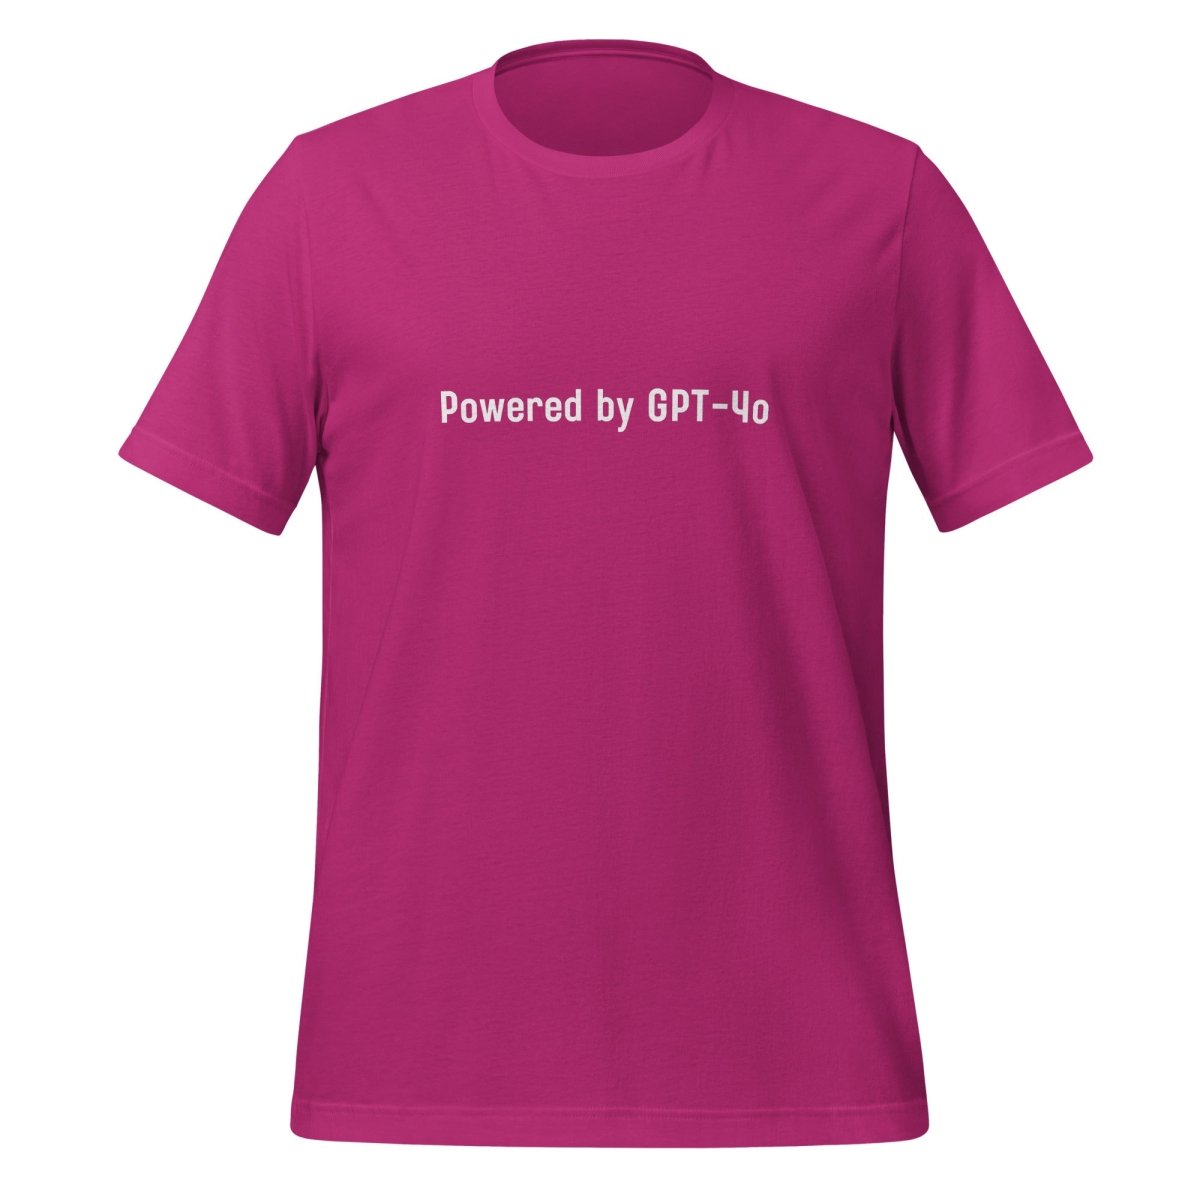 Powered by GPT - 4o T - Shirt 3 (unisex) - Berry - AI Store